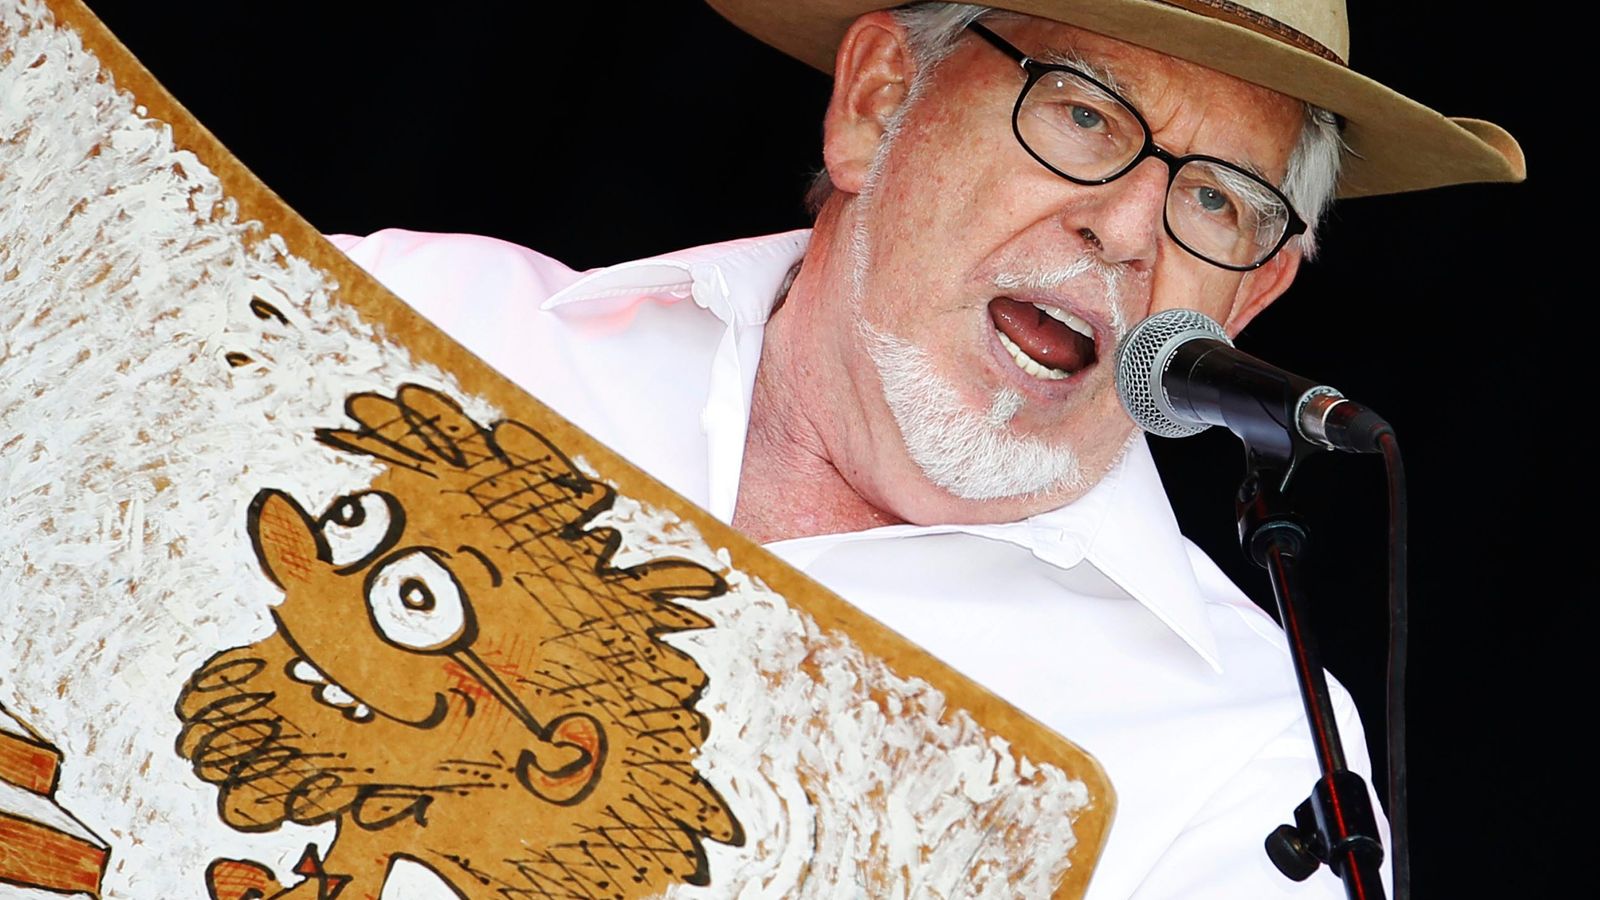 Rolf Harris's greatest fear was not being loved - his depraved crimes ensure that he won't be